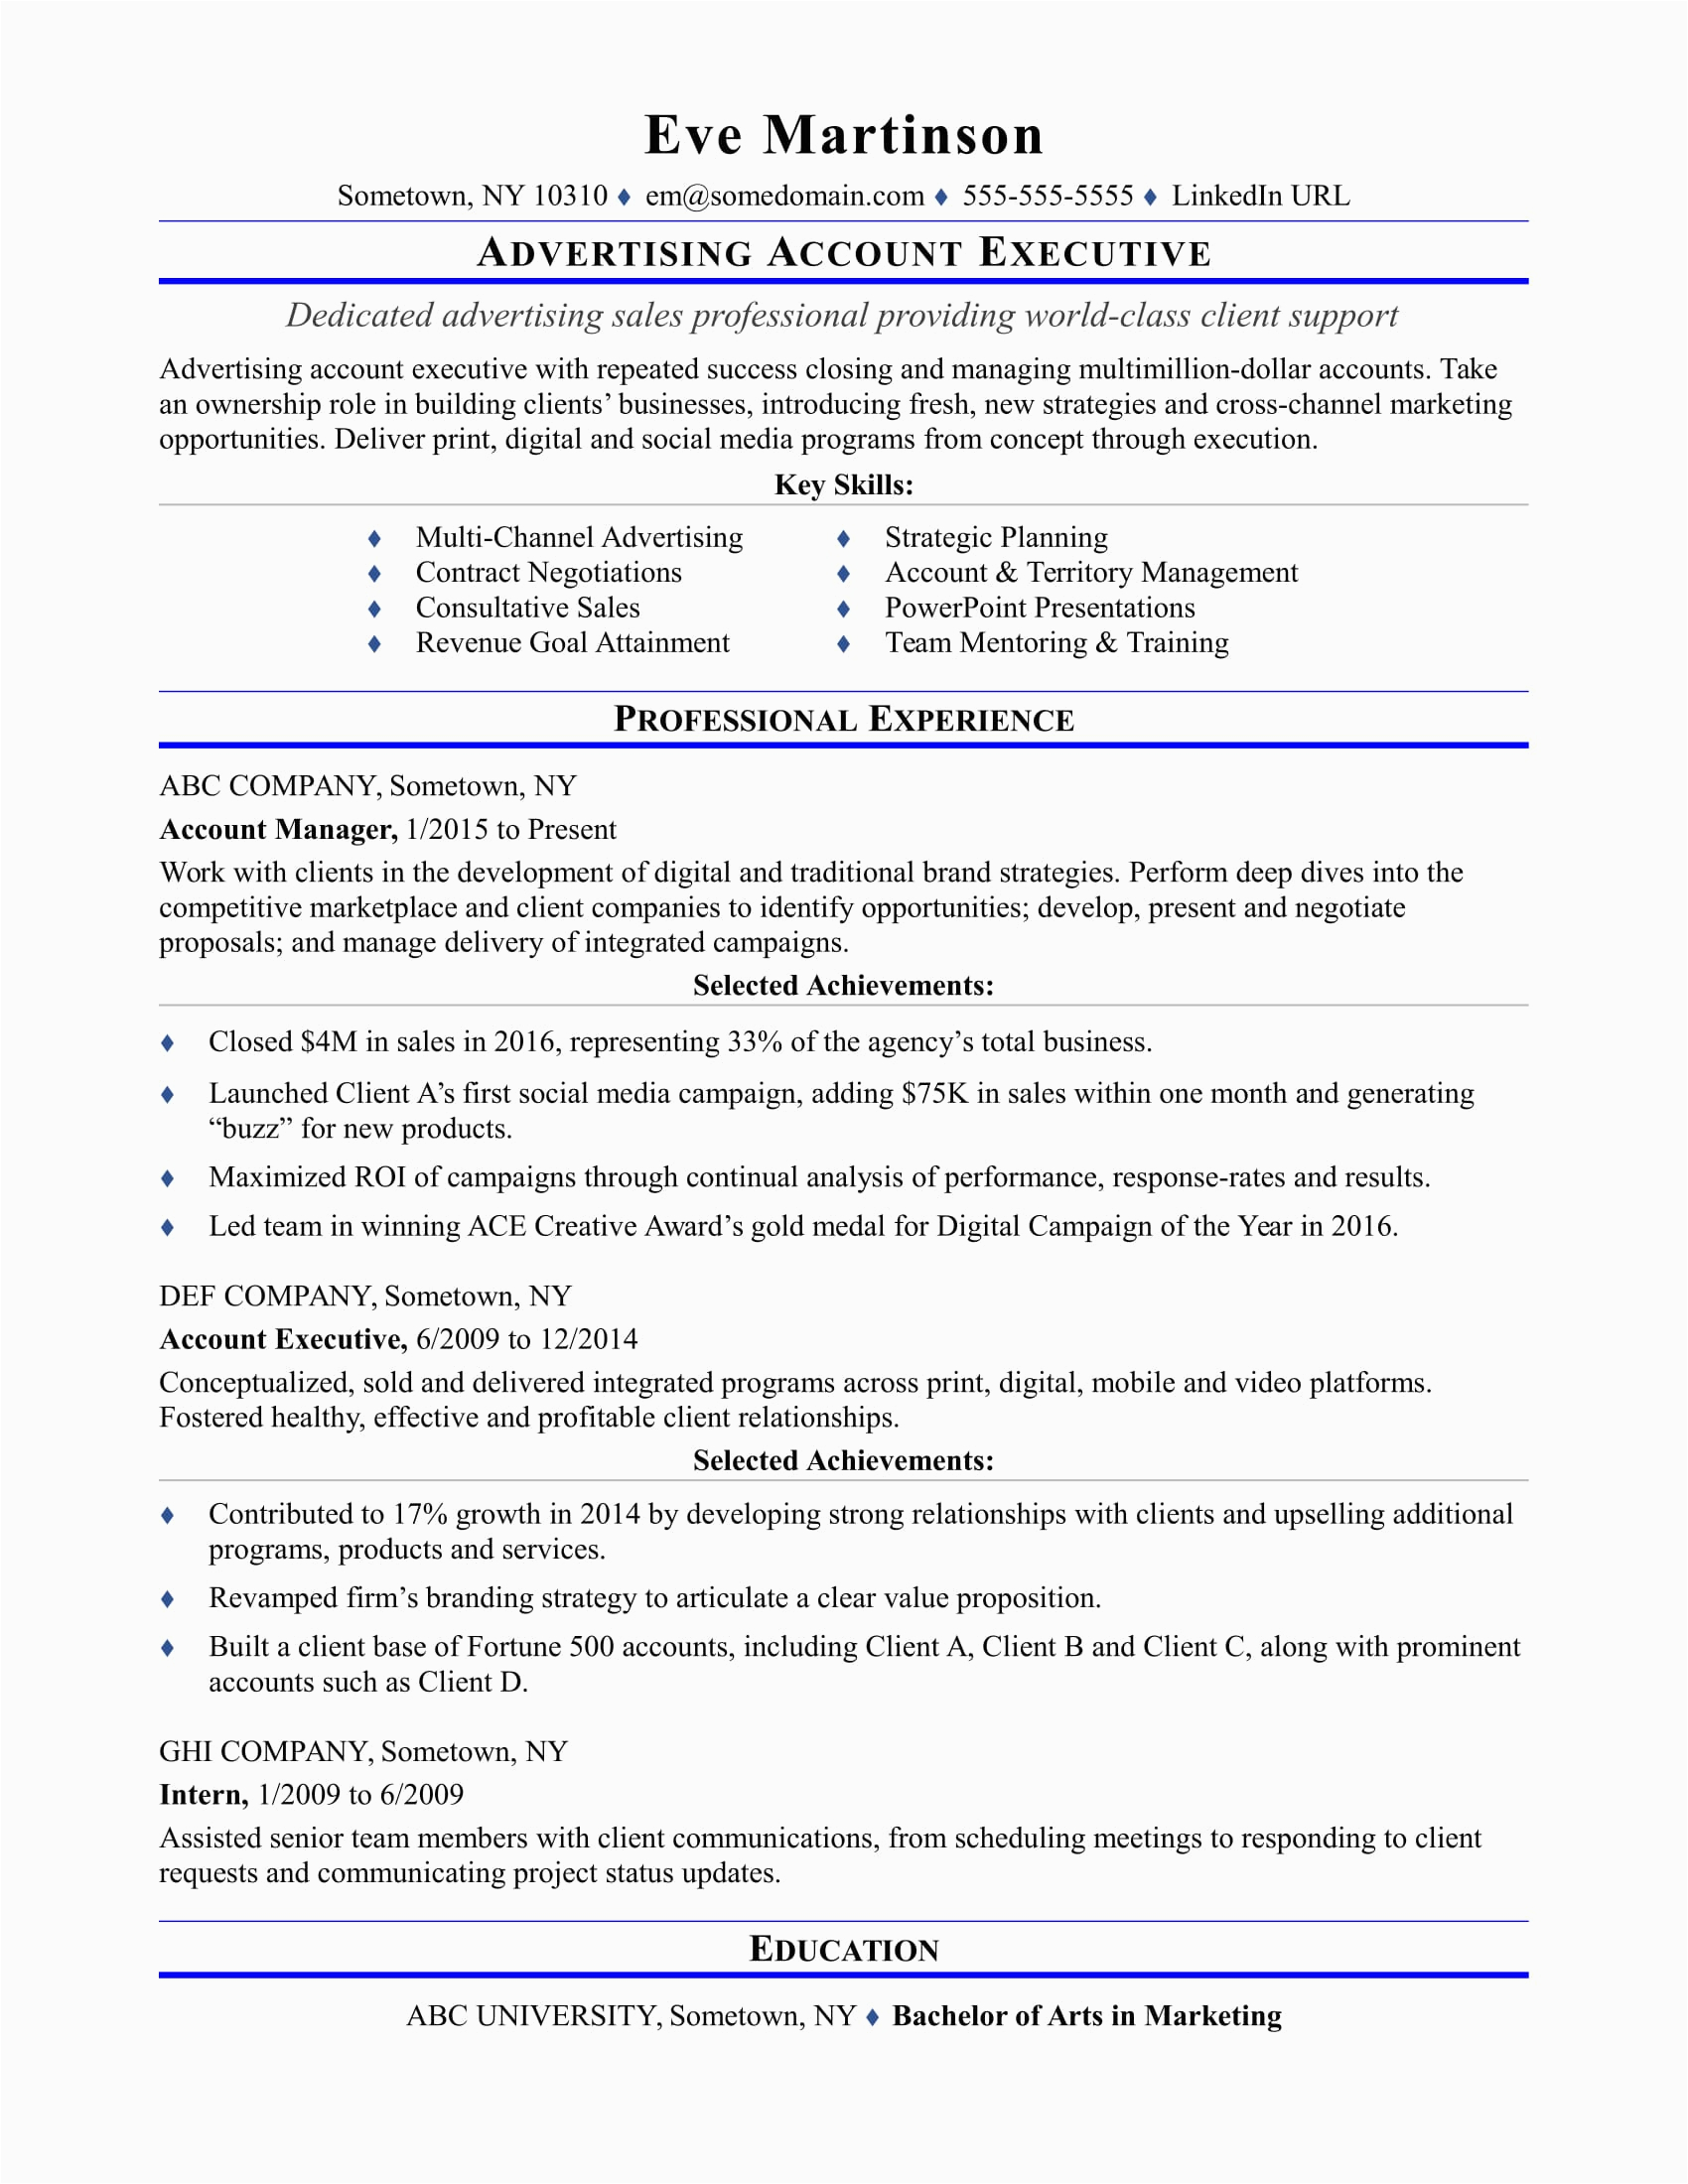 Experienced Account Executive Media Resume Samples Sample Resume for An Advertising Account Executive